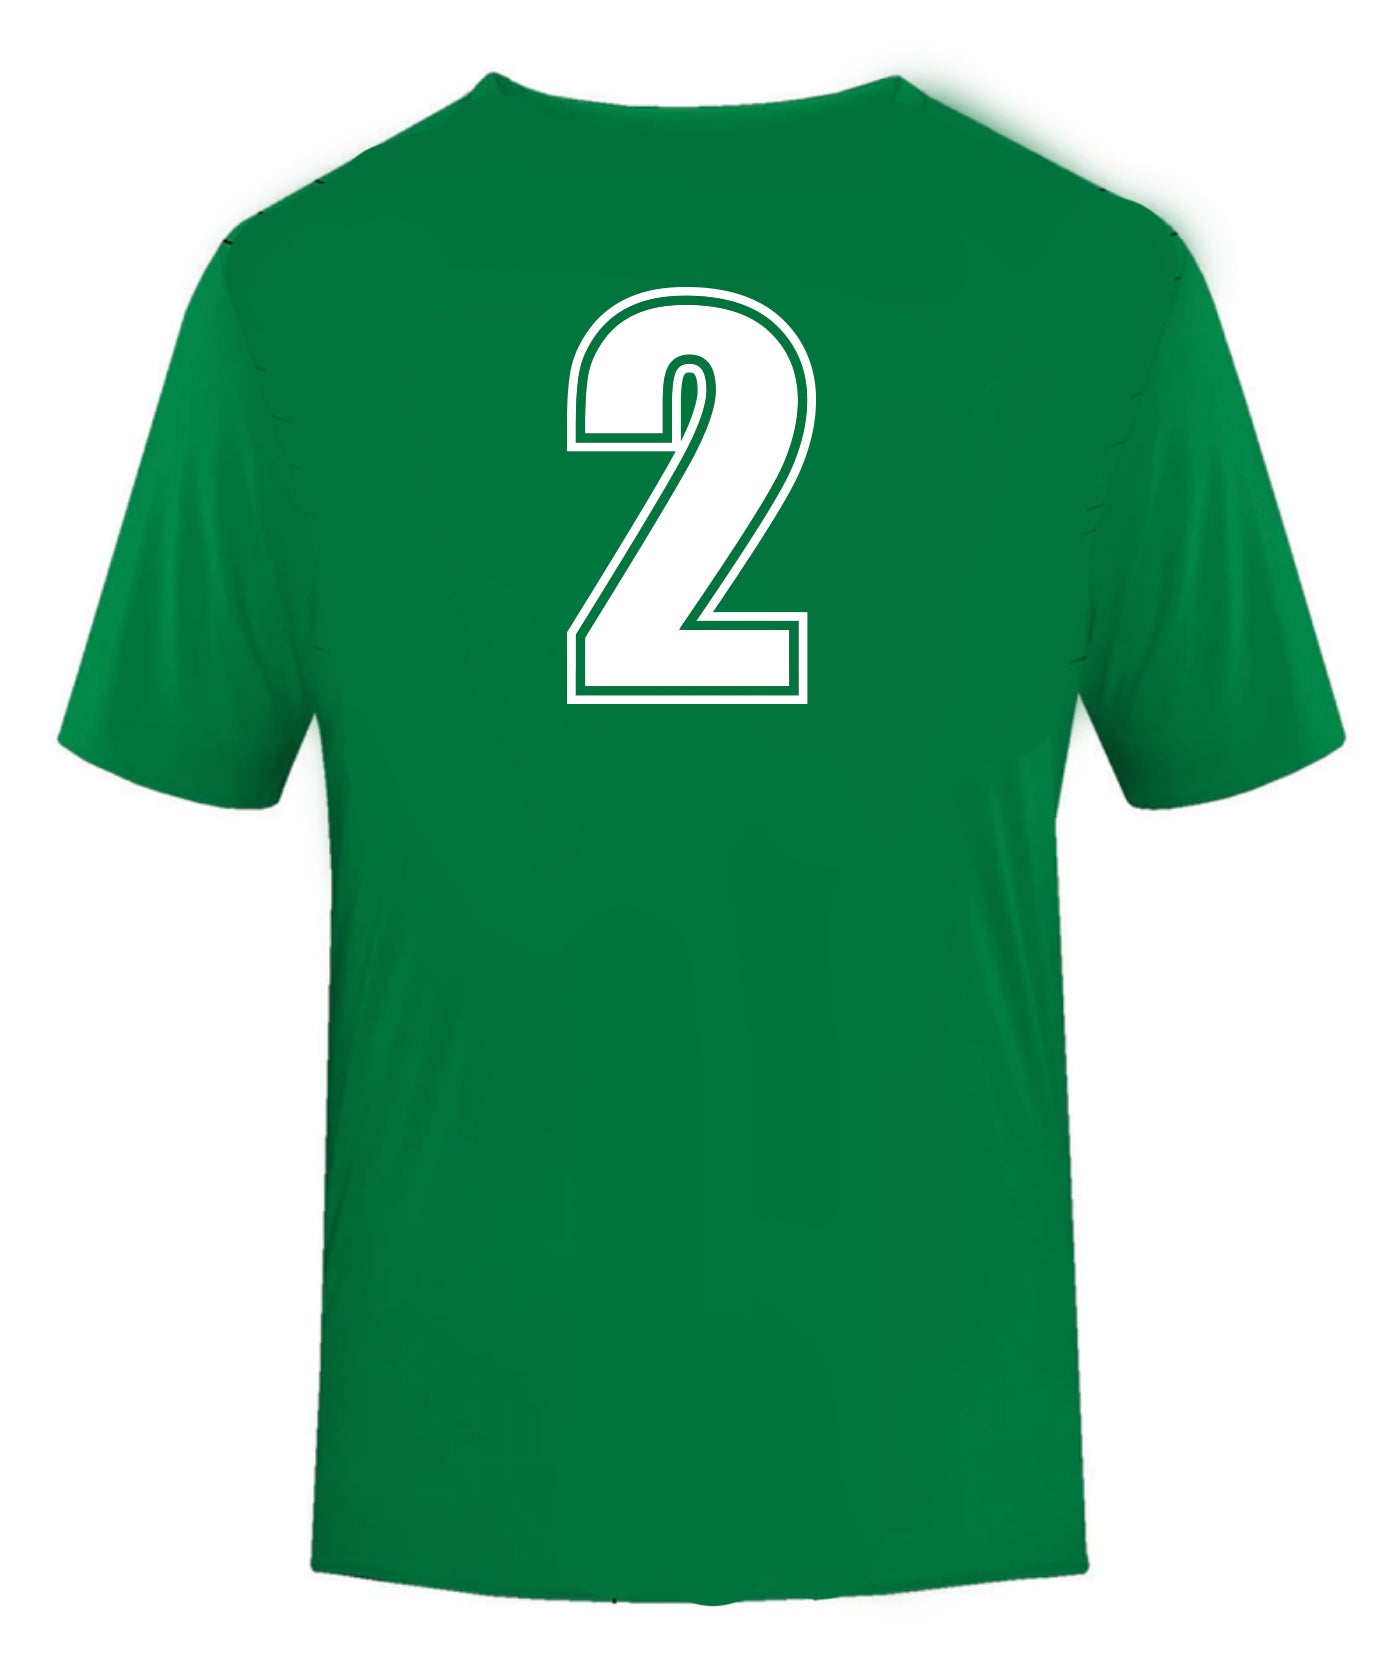 Scottsdale Soccer Jersey - Youth - Youth Sports Products